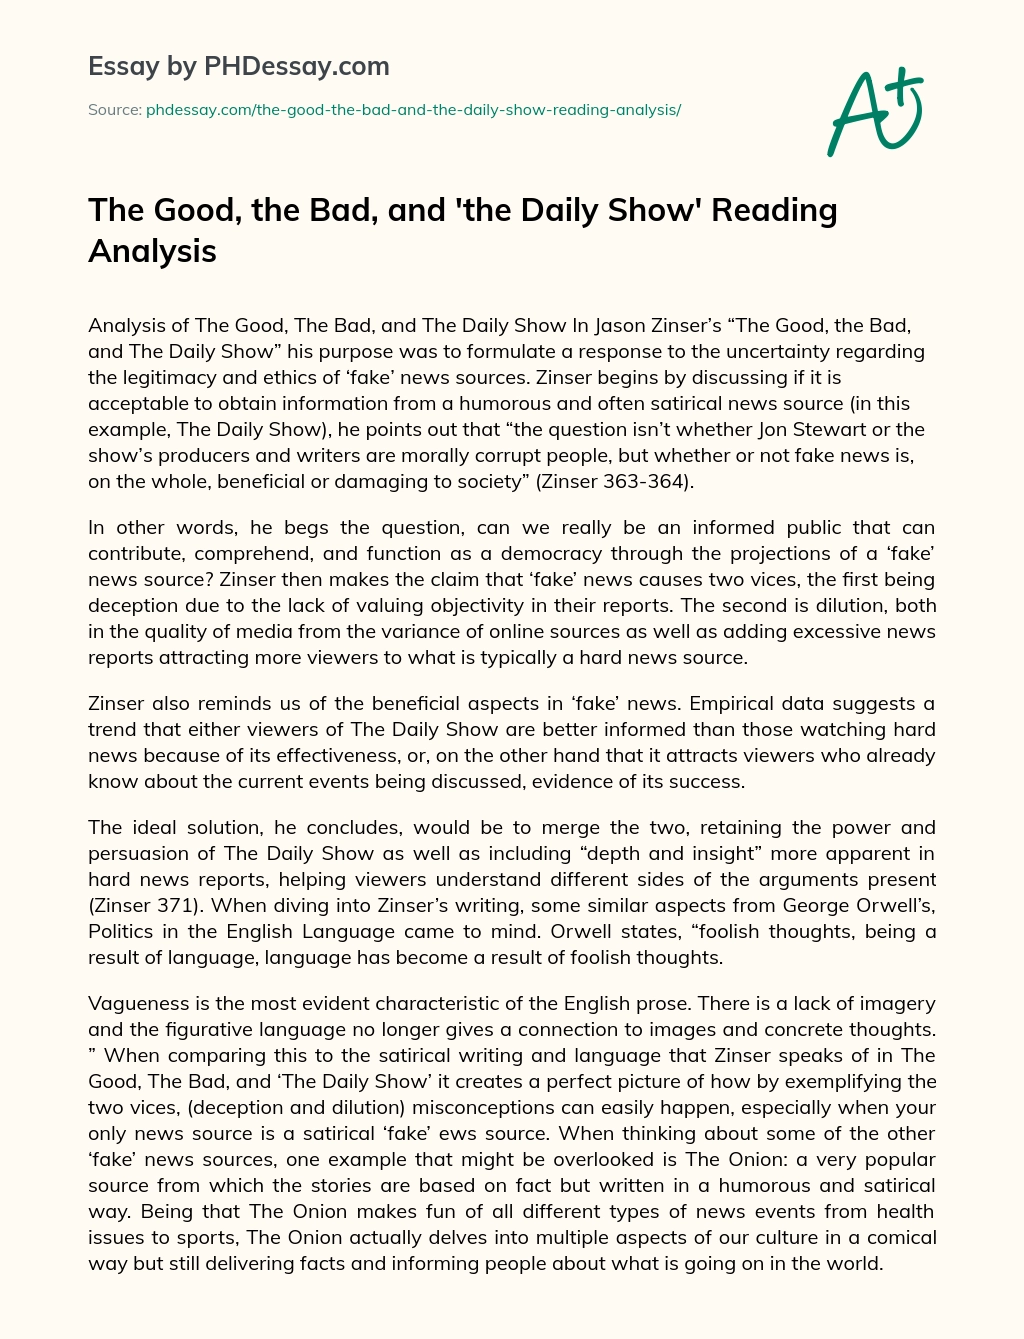 The Good, the Bad, and ‘the Daily Show’ Reading Analysis essay